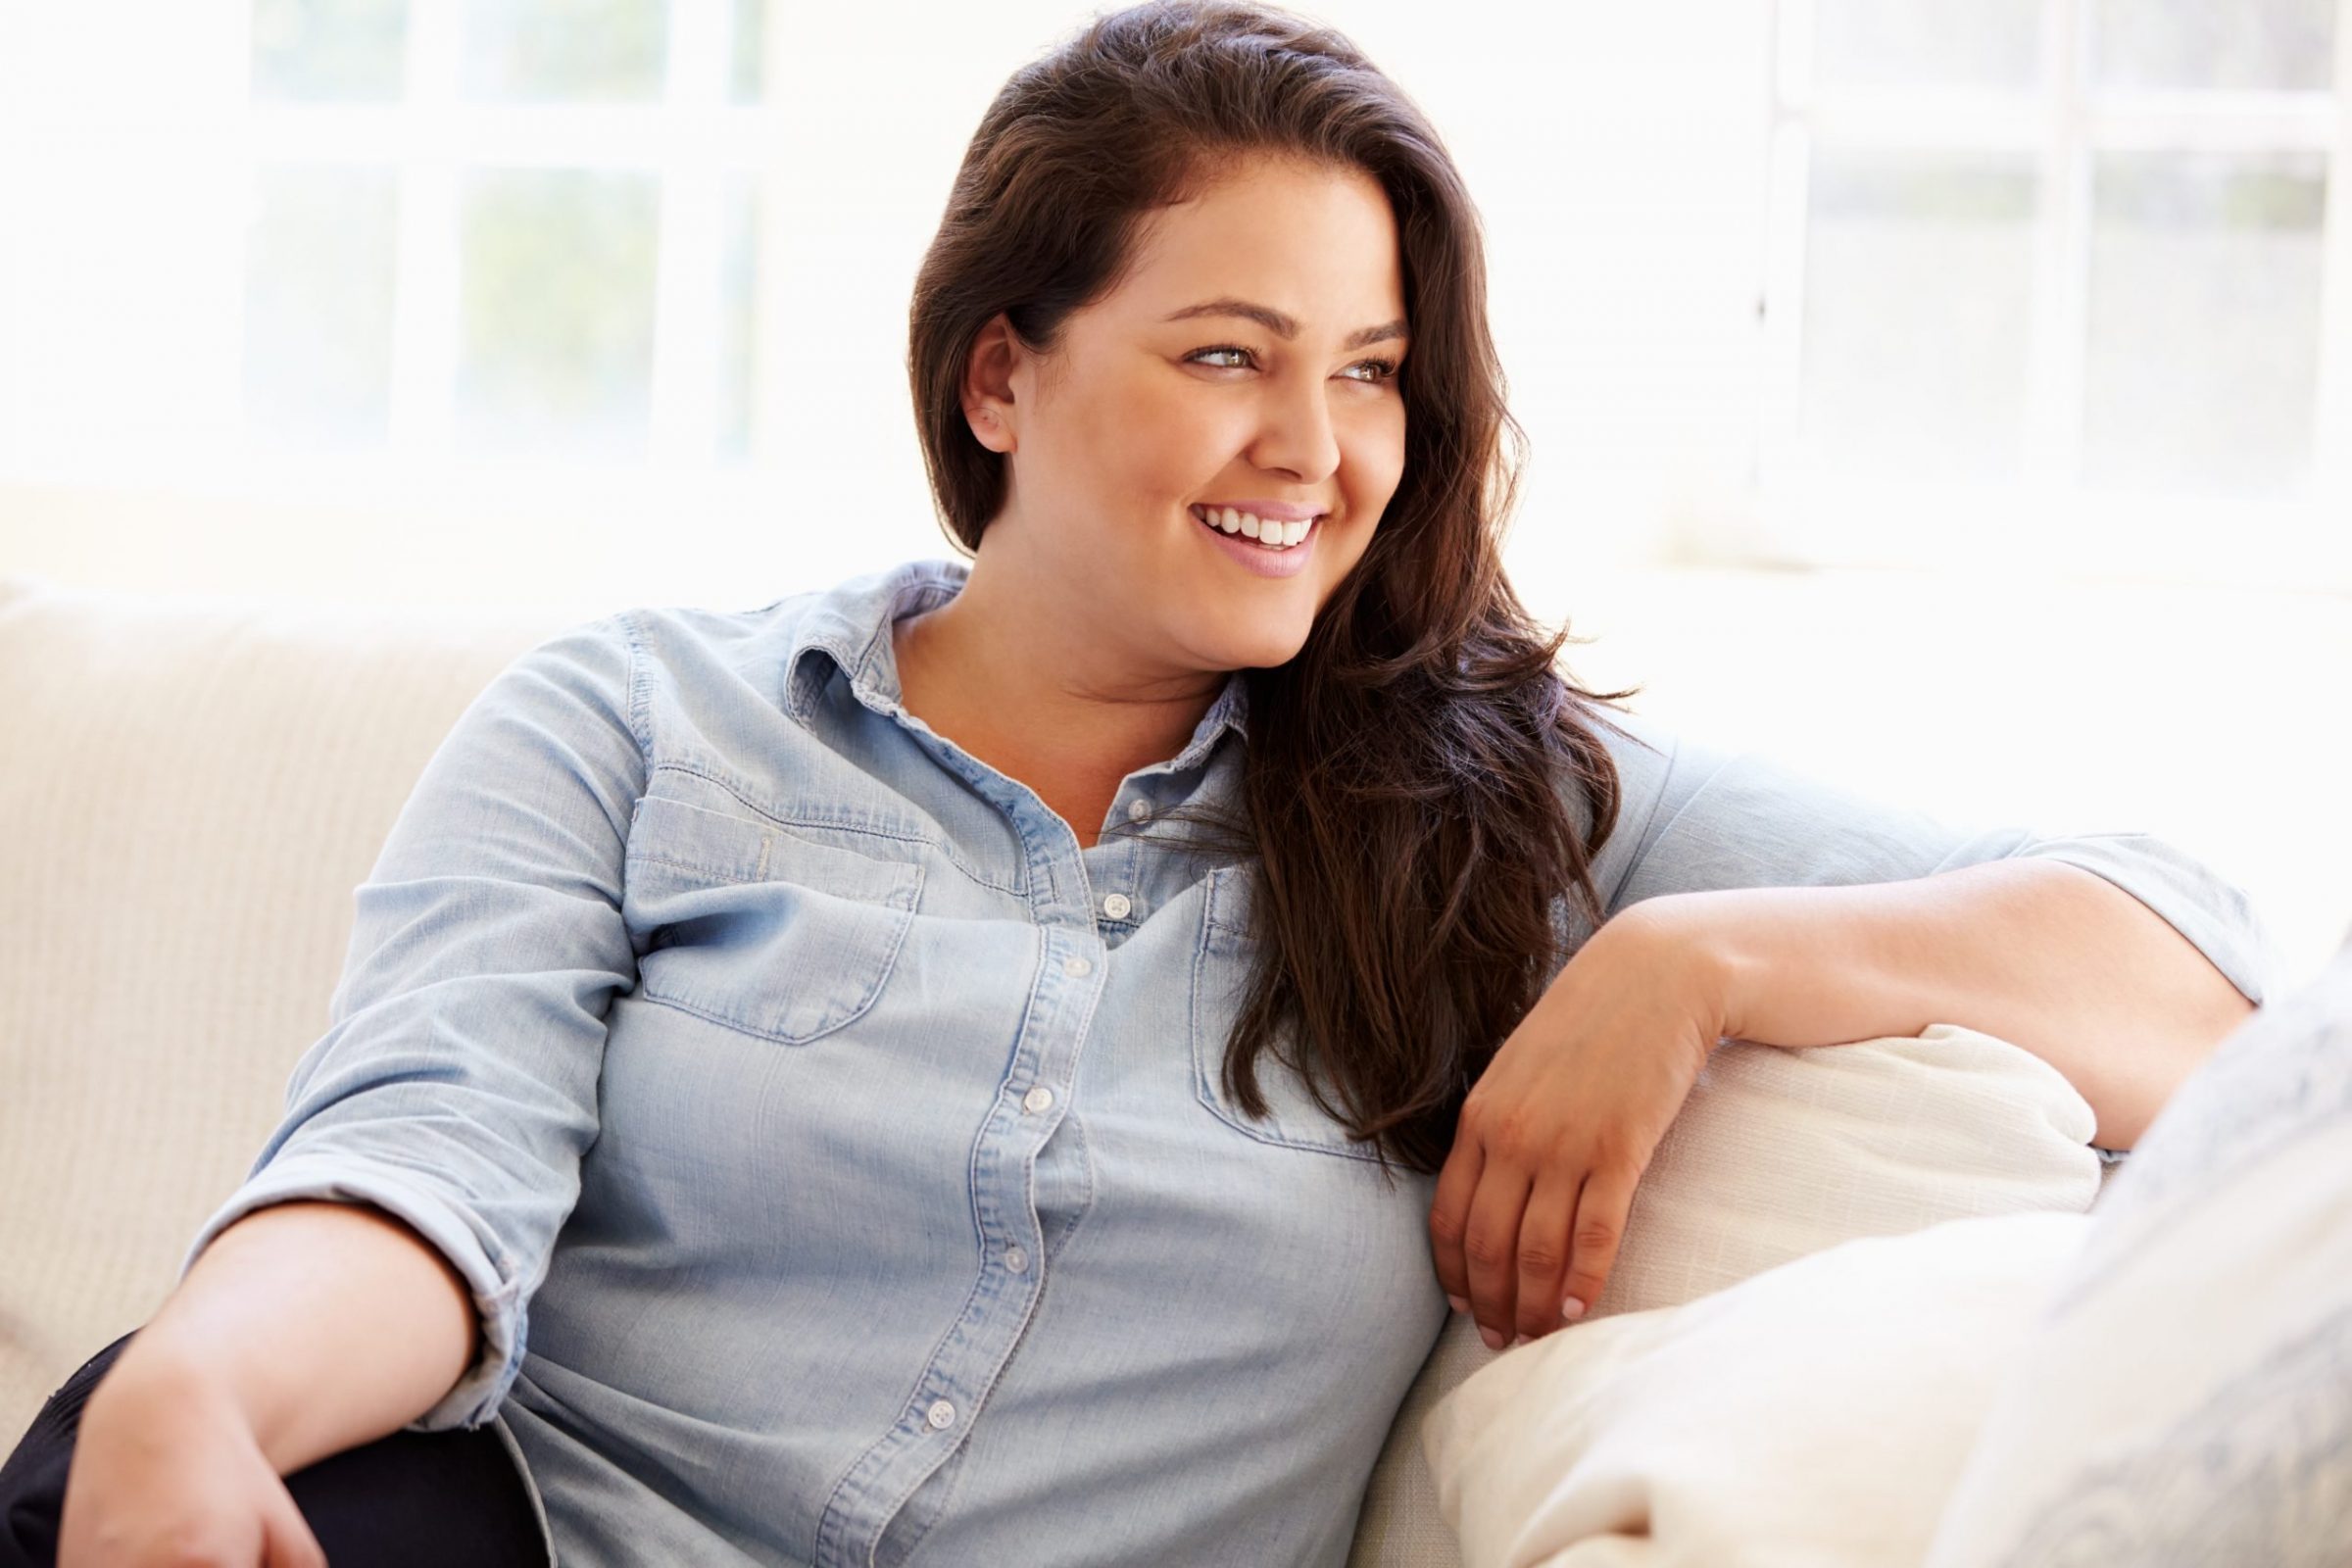 Woman smiling while on a couch with her arm over it